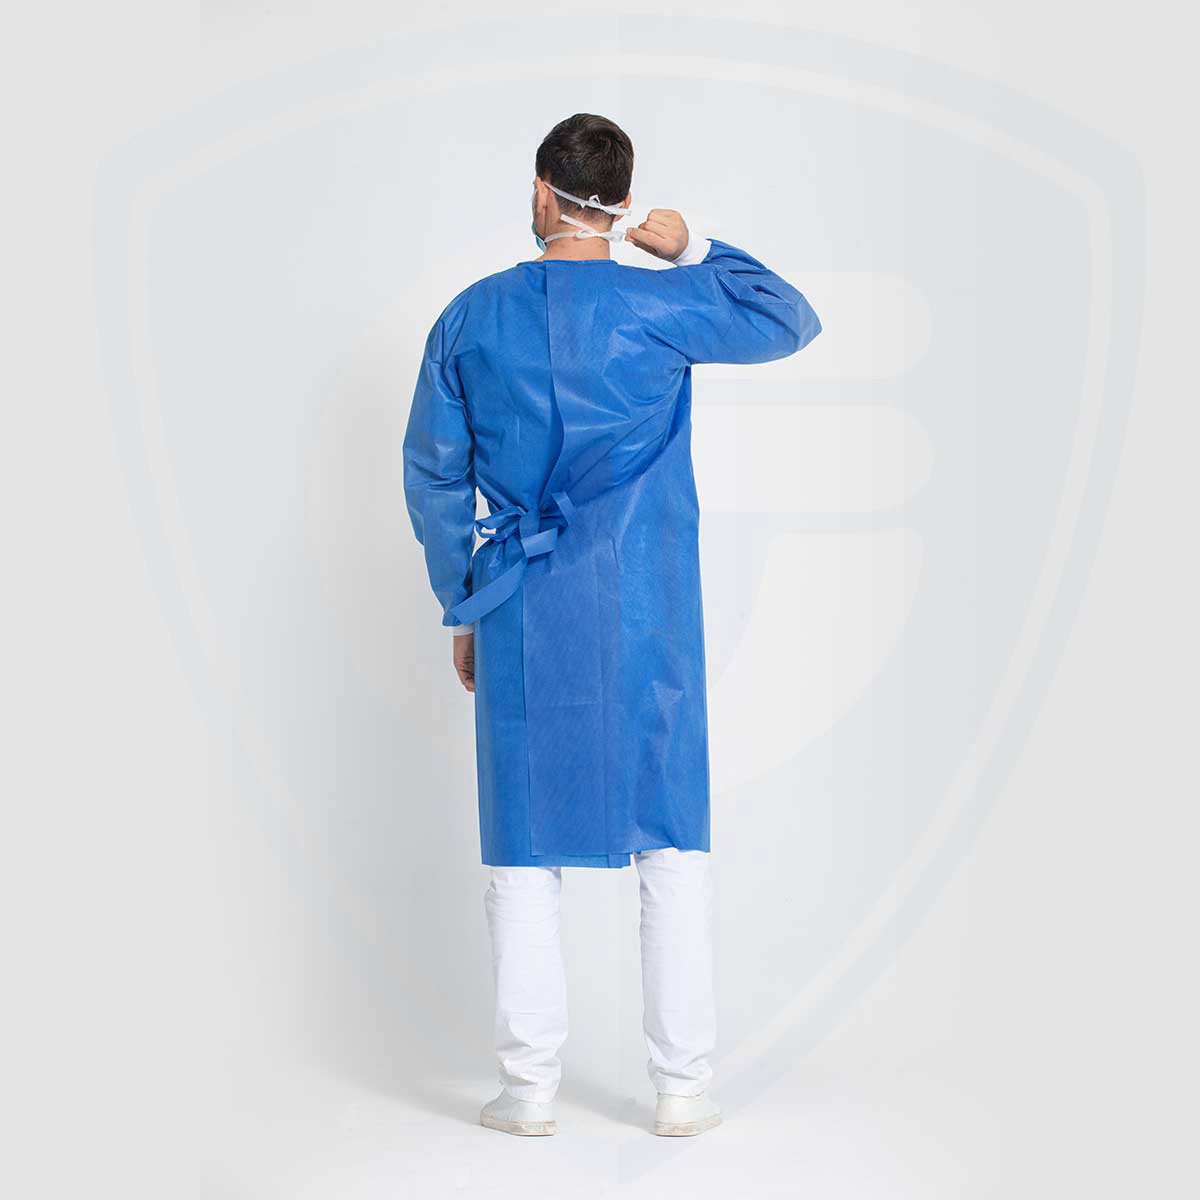 Blue Disposable Isolation Gowns Waterproof with Knit Cuff Latex Free